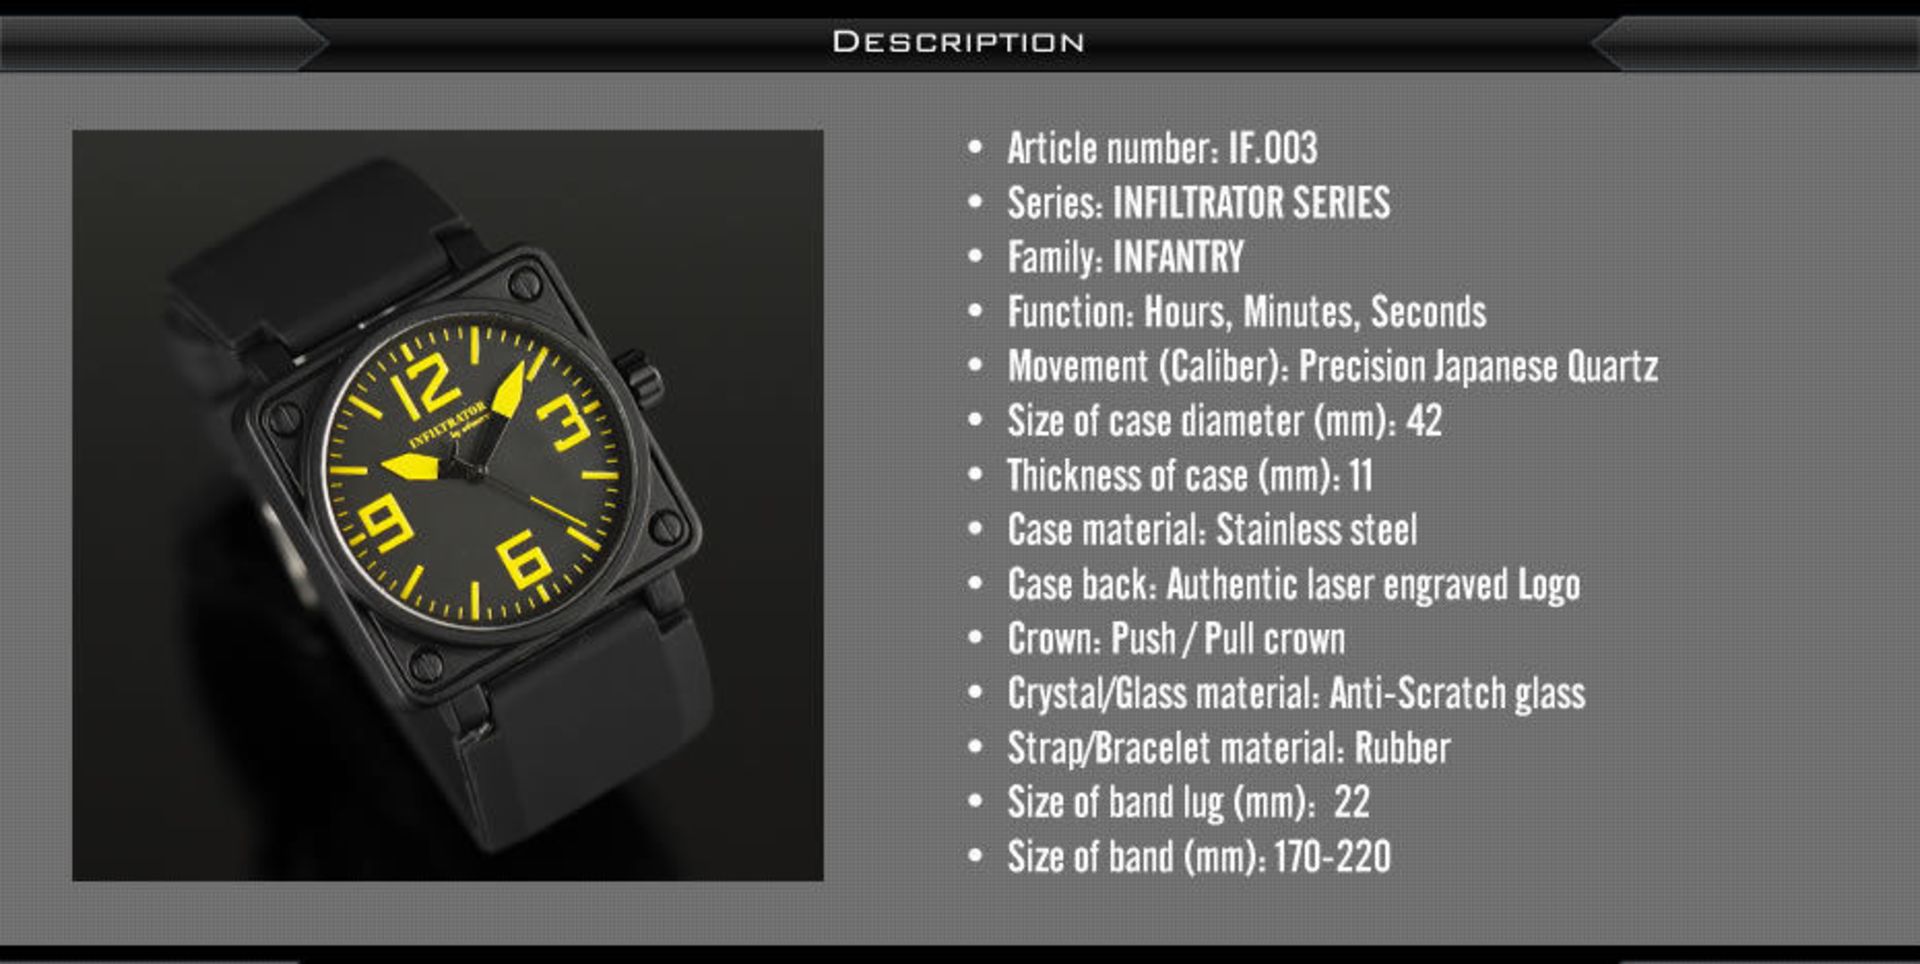 MEN'S INFANTRY WRIST WATCH BLACK FACE YELLOW DIALS RUBBER STRAP, BRAND NEW IN BOX *PLUS VAT* - Image 8 of 9